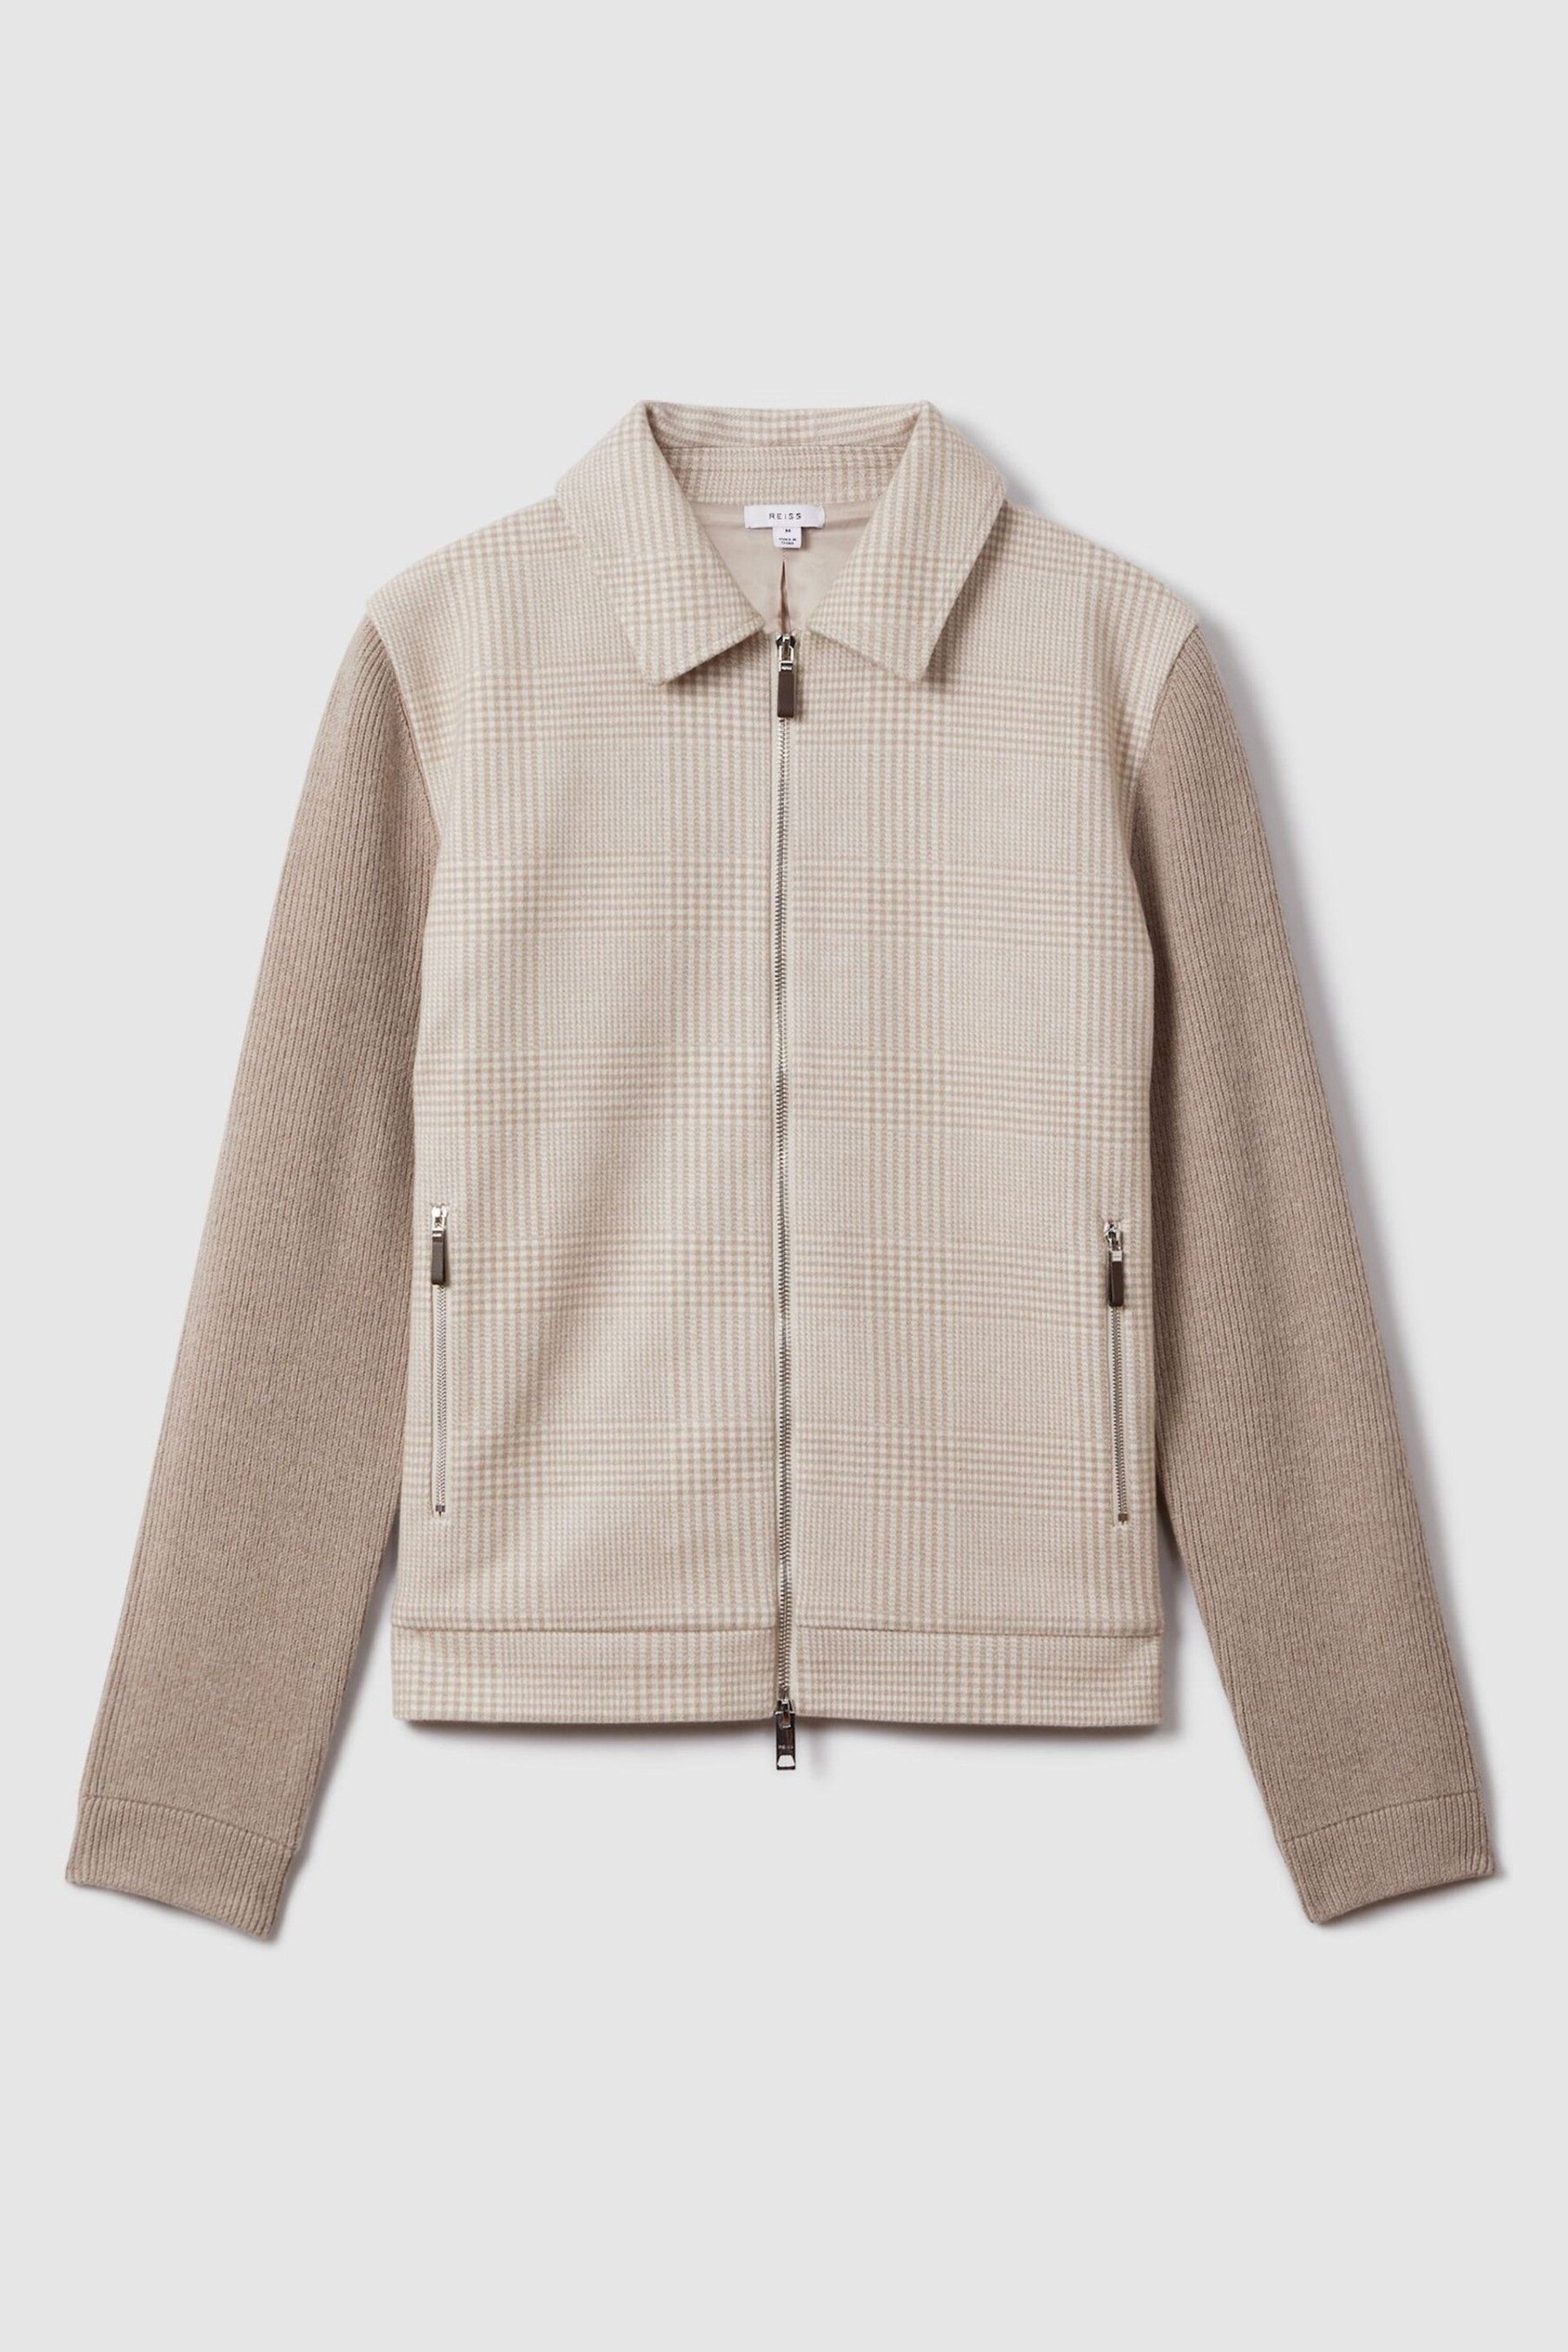 Reiss Oatmeal Max Hybrid Knit Zip-Through Jacket - Image 2 of 6